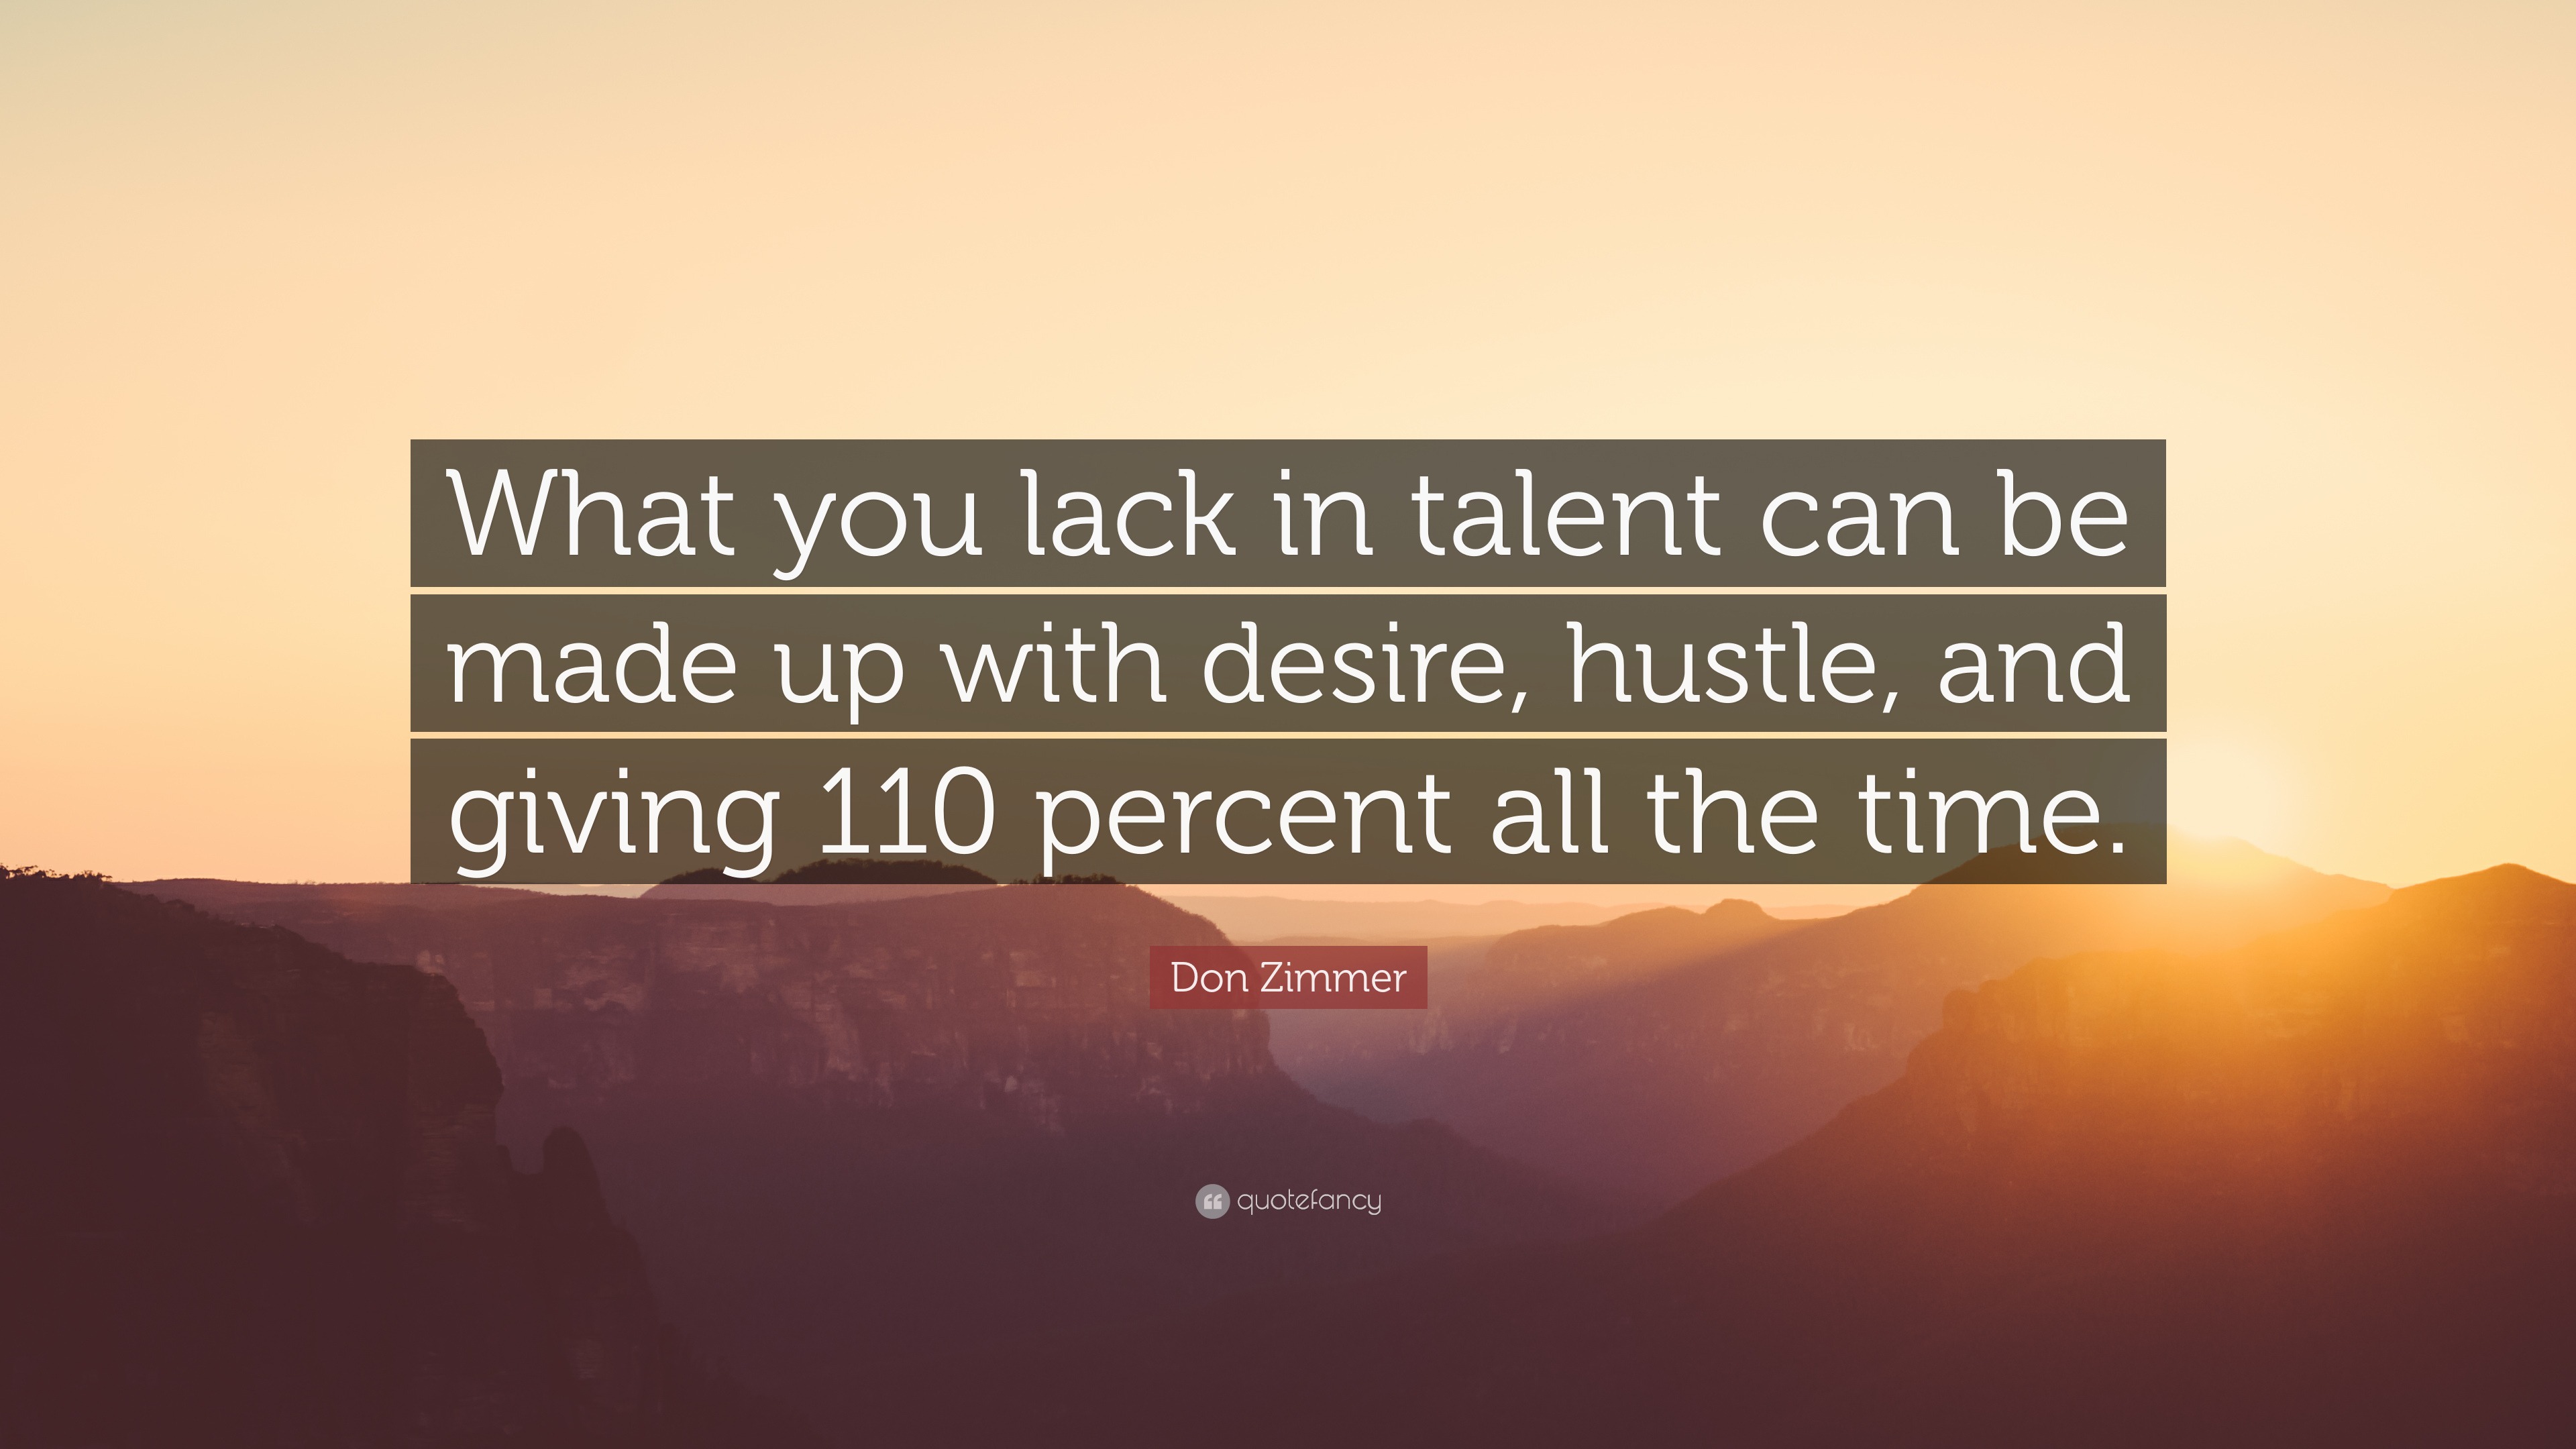 Don Zimmer Quote: “What you lack in talent can be made up with desire,  hustle, and